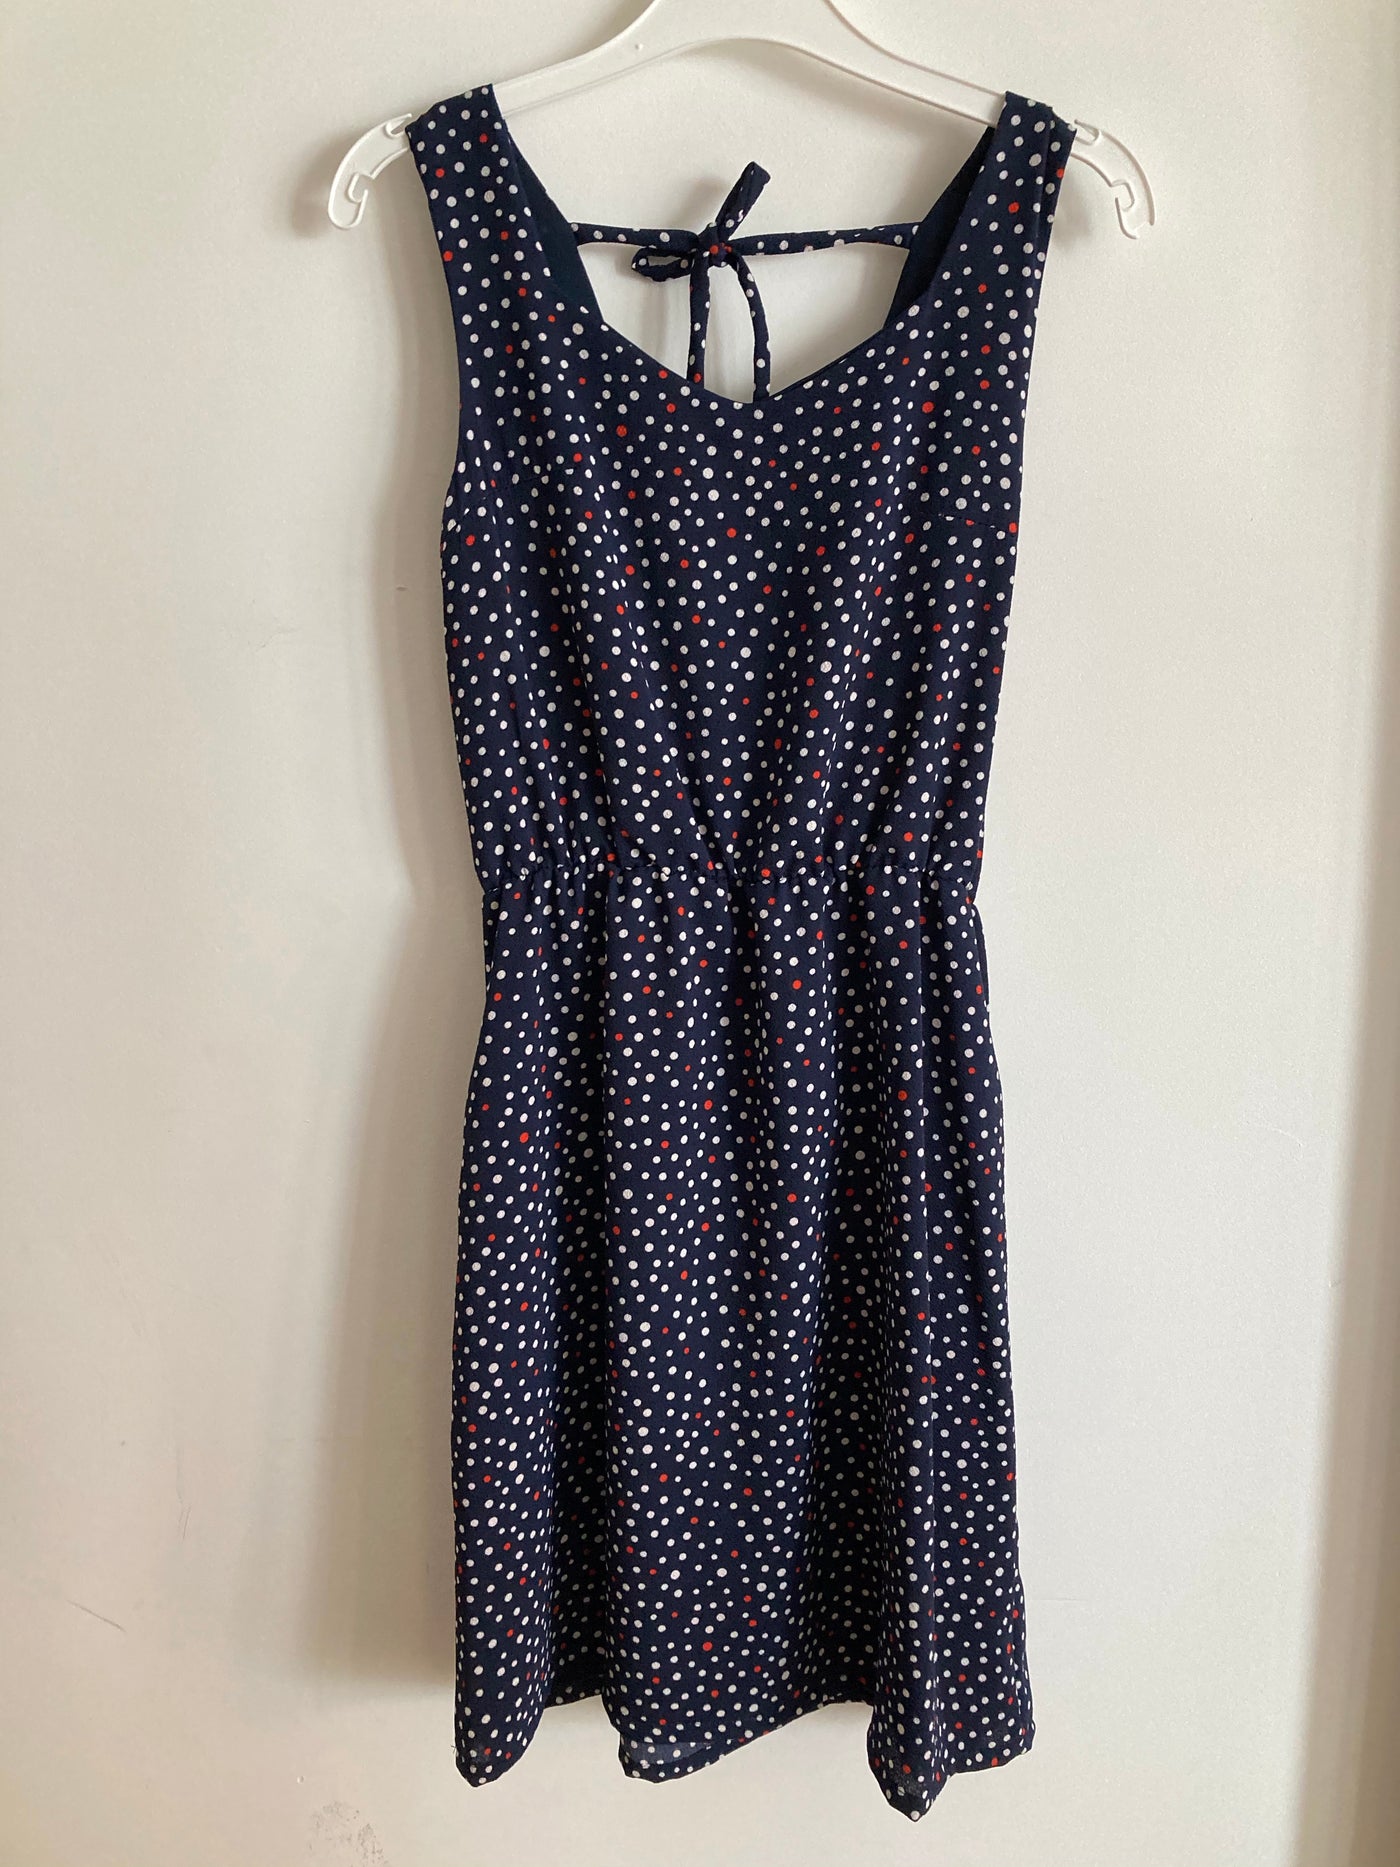 West Coast dress - blue and red polka dots